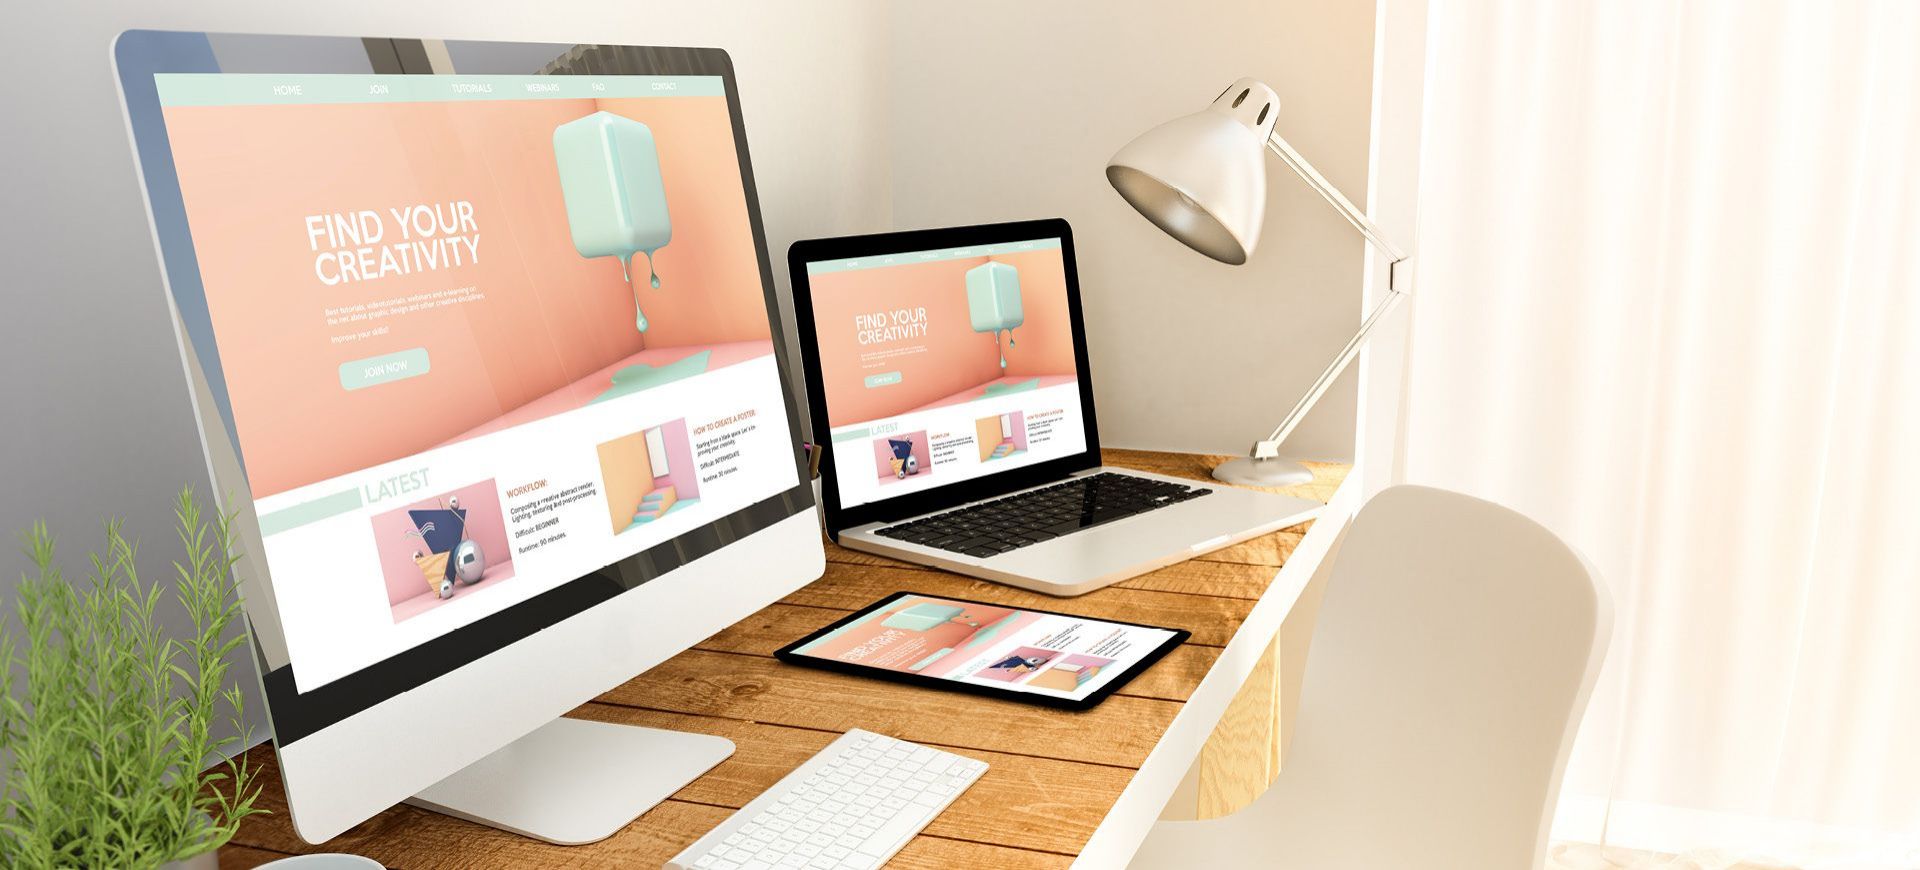 How Custom Web Design Can Improve Your Business